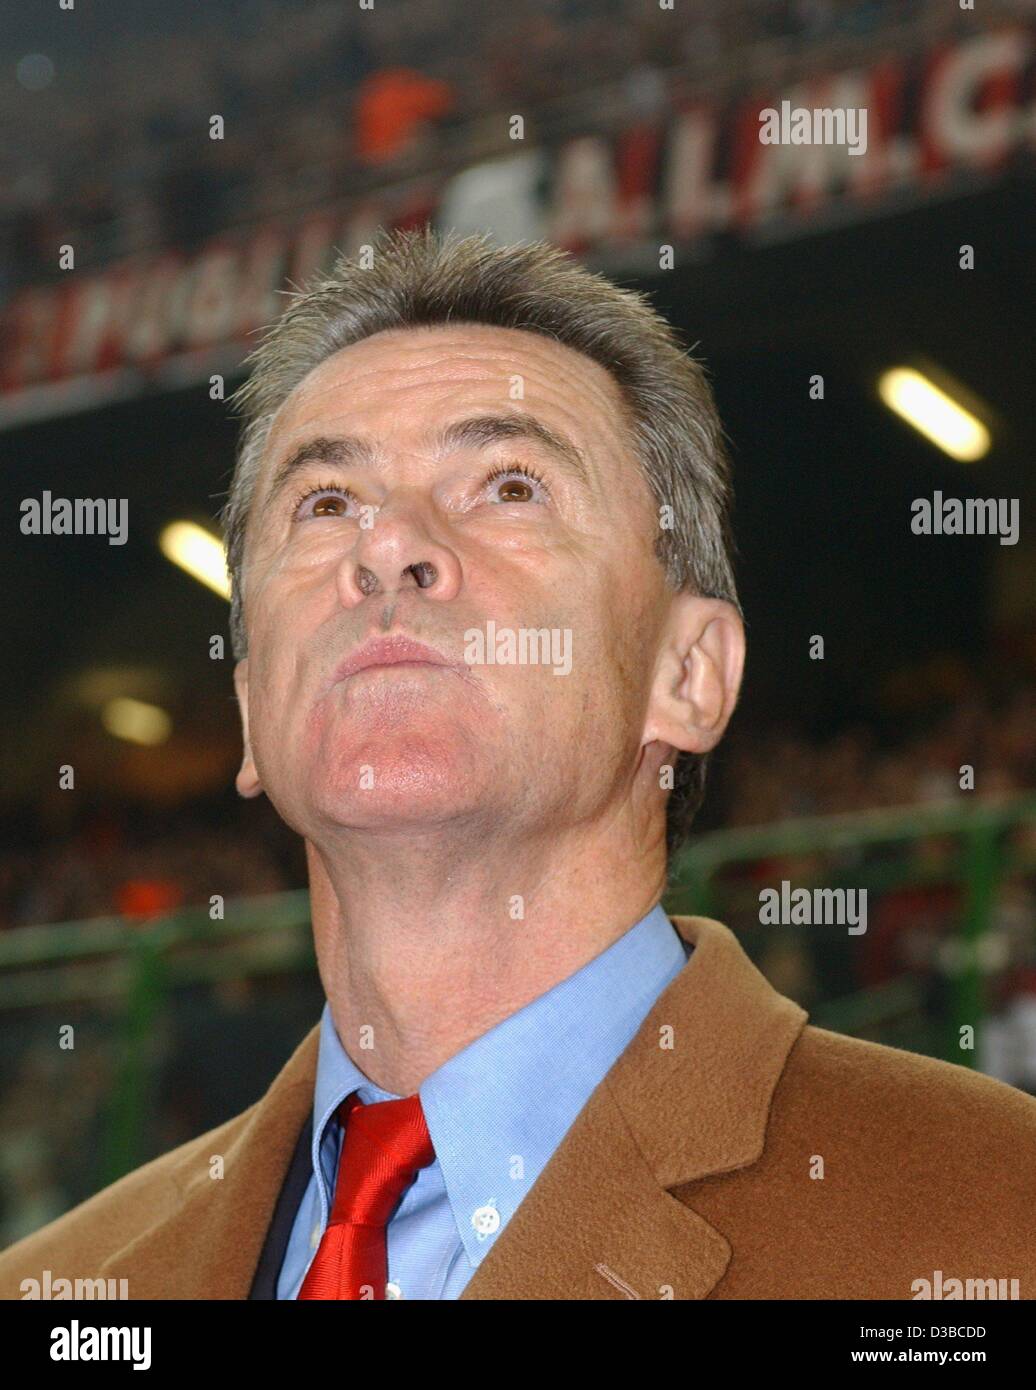 (dpa) - Bayern's soccer coach Ottmar Hitzfeld looks sceptically up to a read the score board during the UEFA Champions League match AC Milan against FC Bayern Munich in Milan, Italy, 23 October 2002. Milan won 2:1. Stock Photo